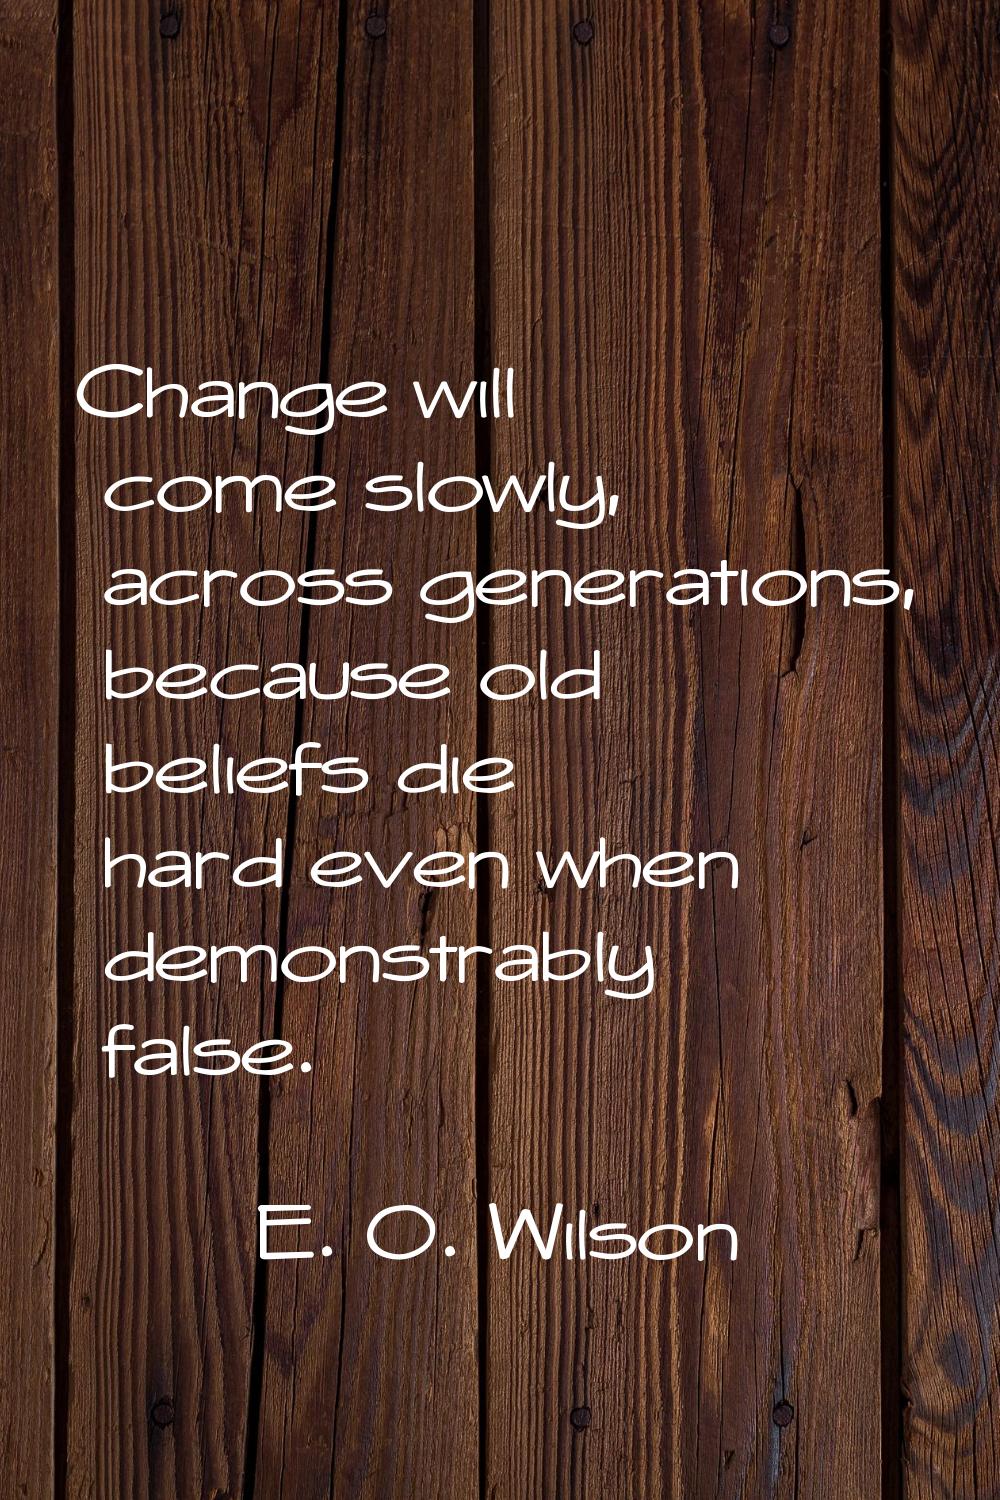 Change will come slowly, across generations, because old beliefs die hard even when demonstrably fa